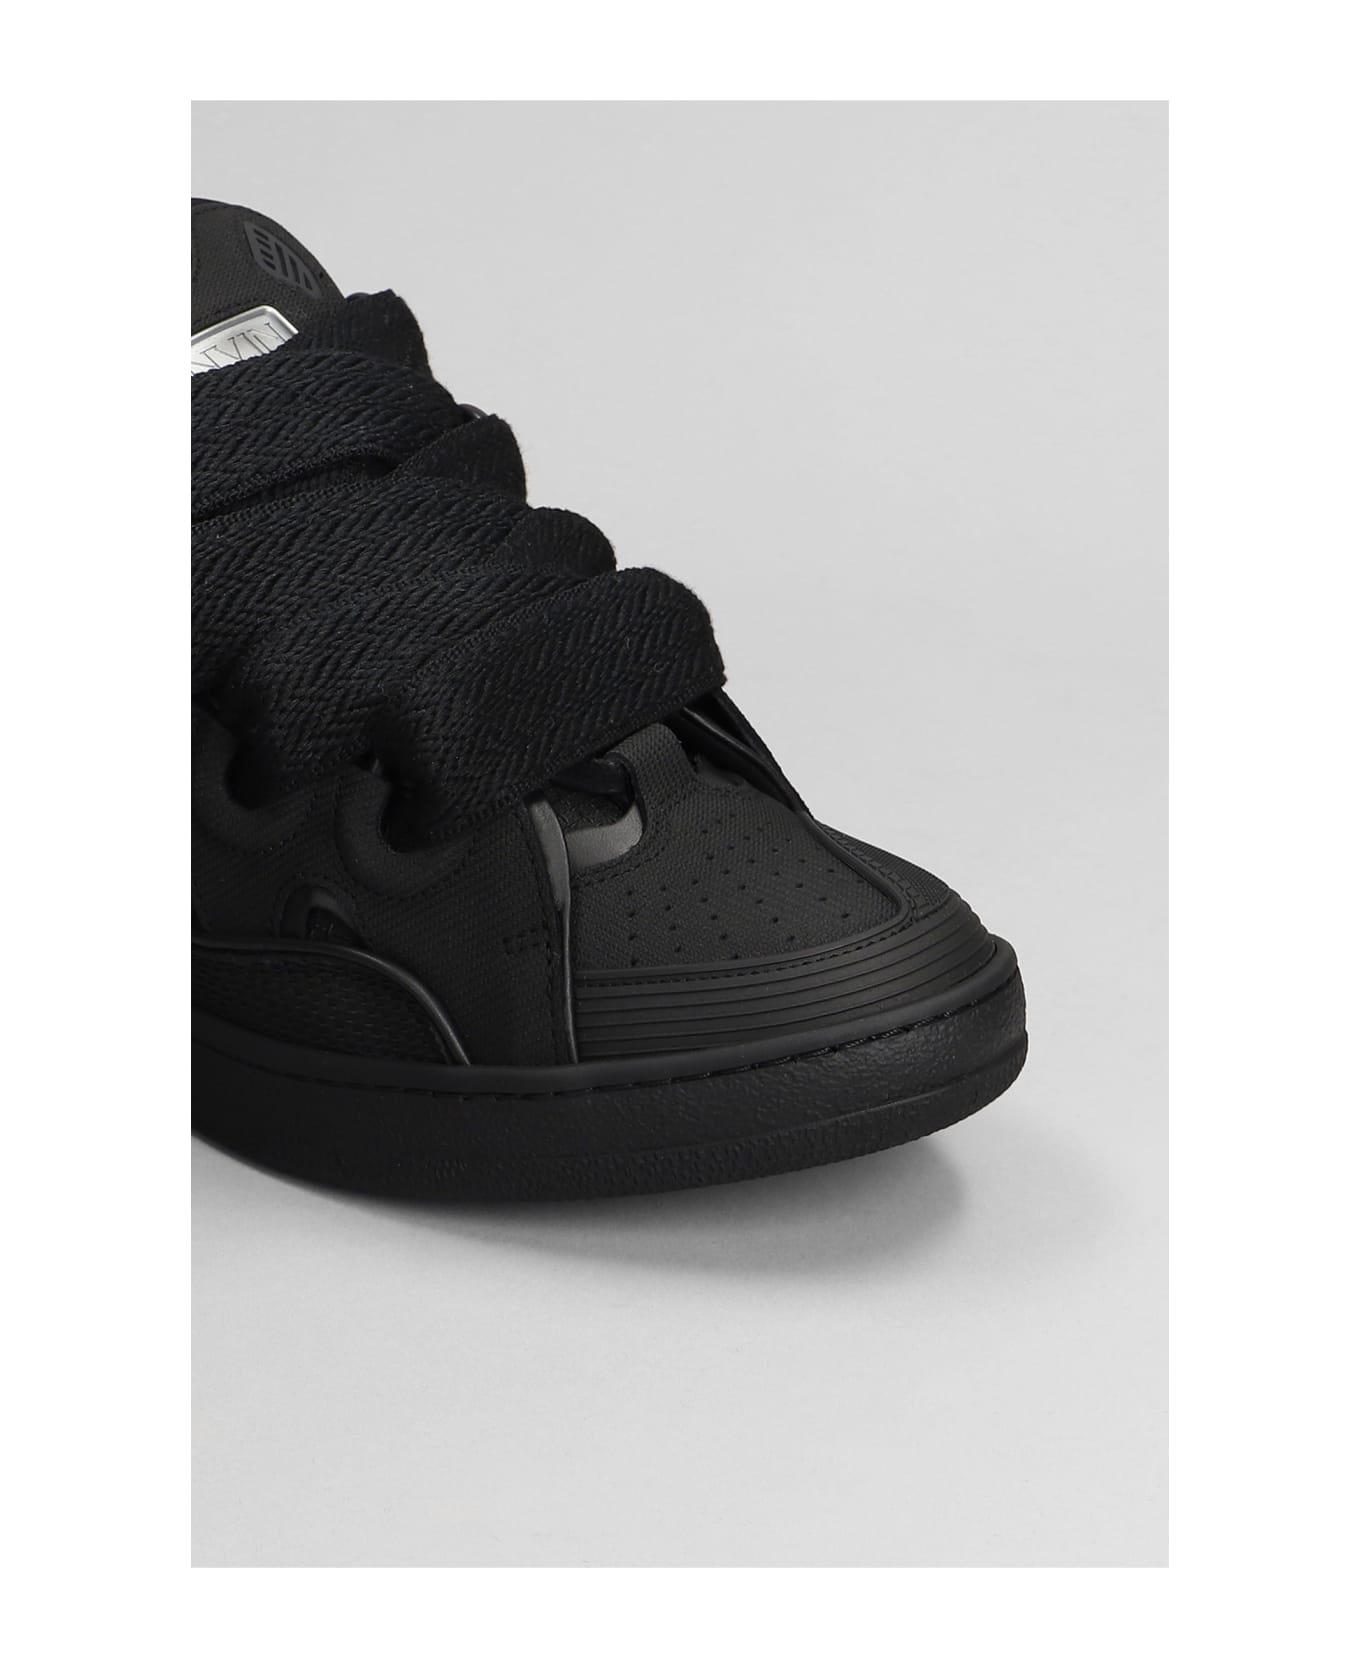 Lanvin Curb Sneakers In Black Leather - black スニーカー